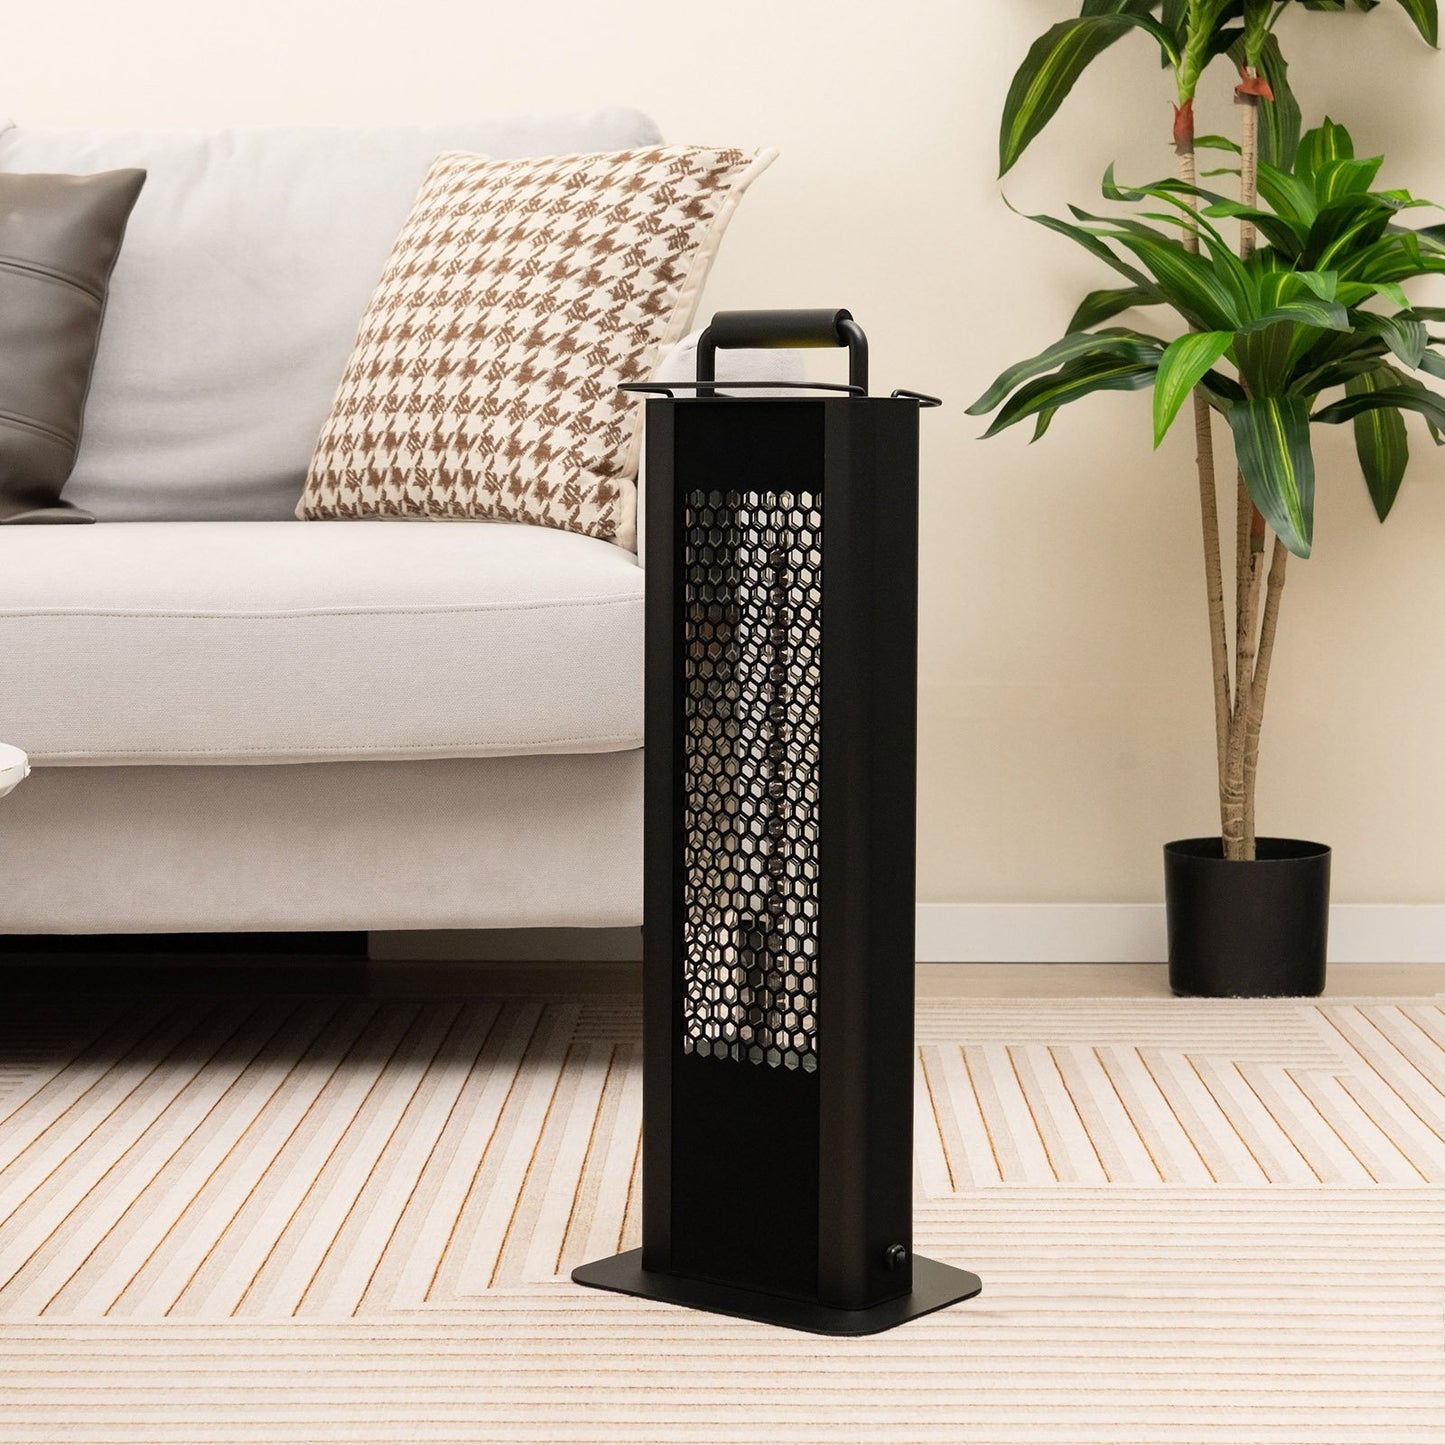 IP65 Waterproof Aluminum Heater with Double-Sided Heating and Overheat Protection, Black